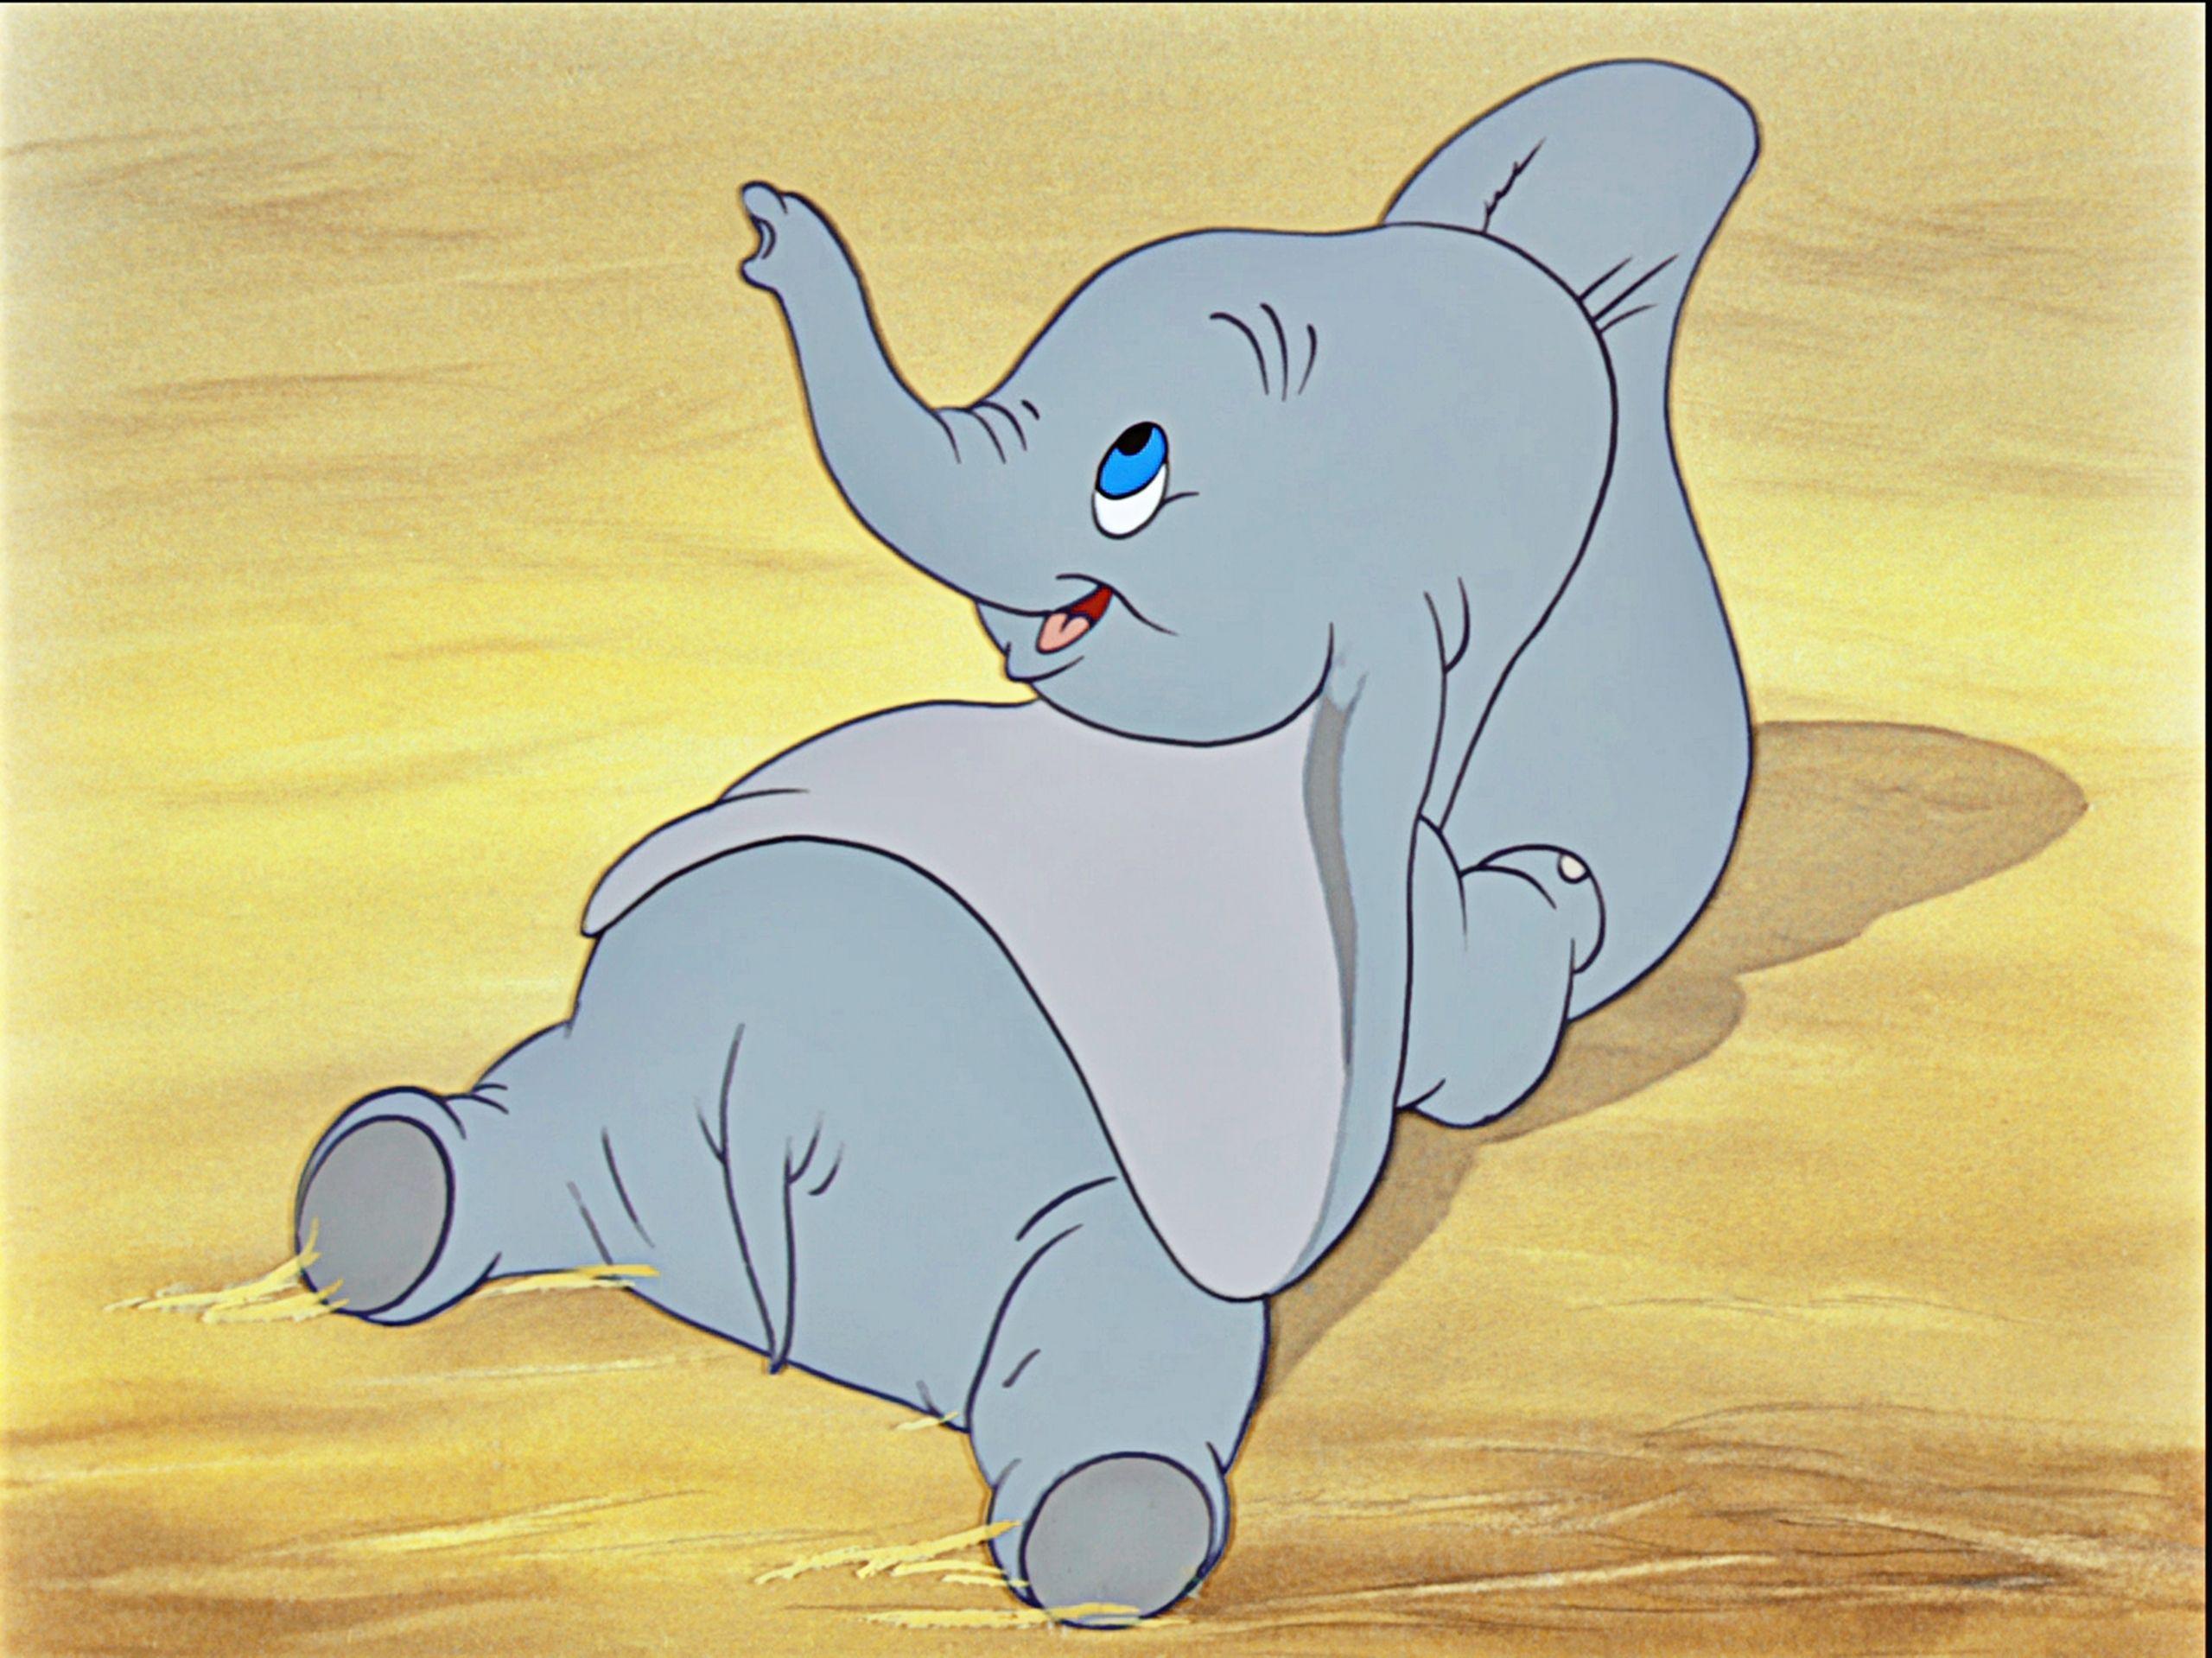 best image about Dumbo. Disney, Double dare